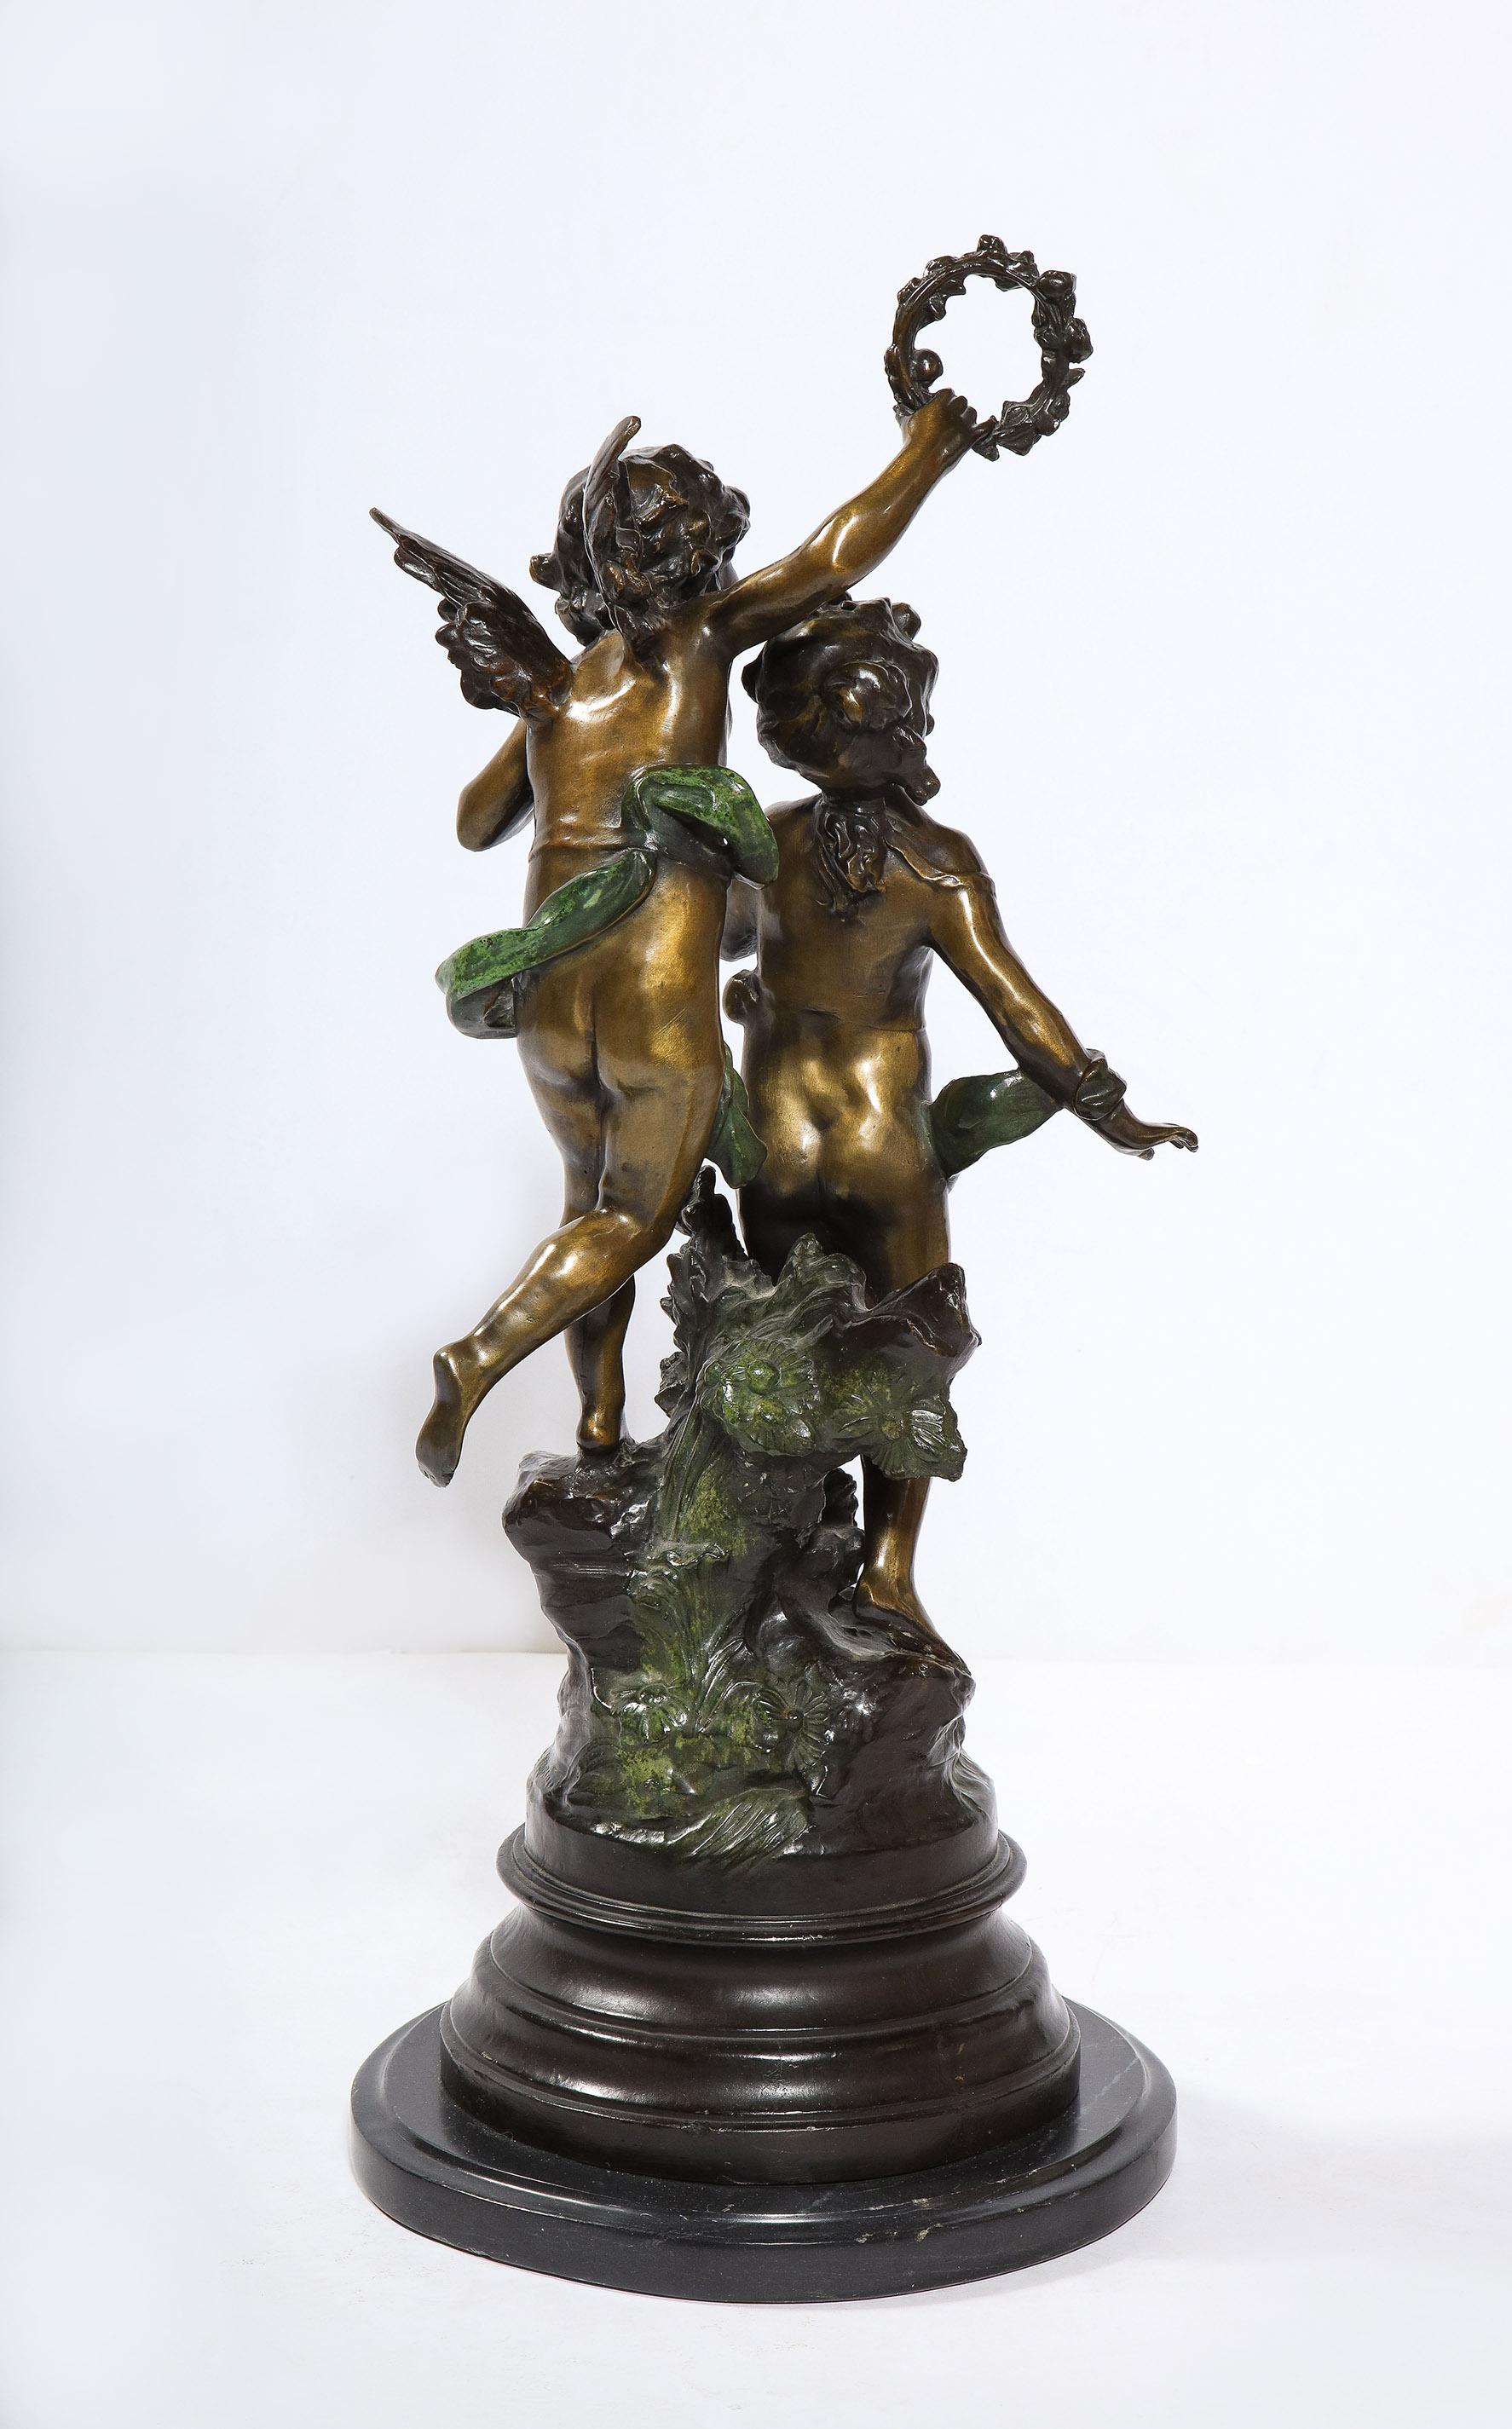 Fine Patinated Bronze Sculpture by Auguste Moreau - Gold Figurative Sculpture by Louis Auguste Moreau